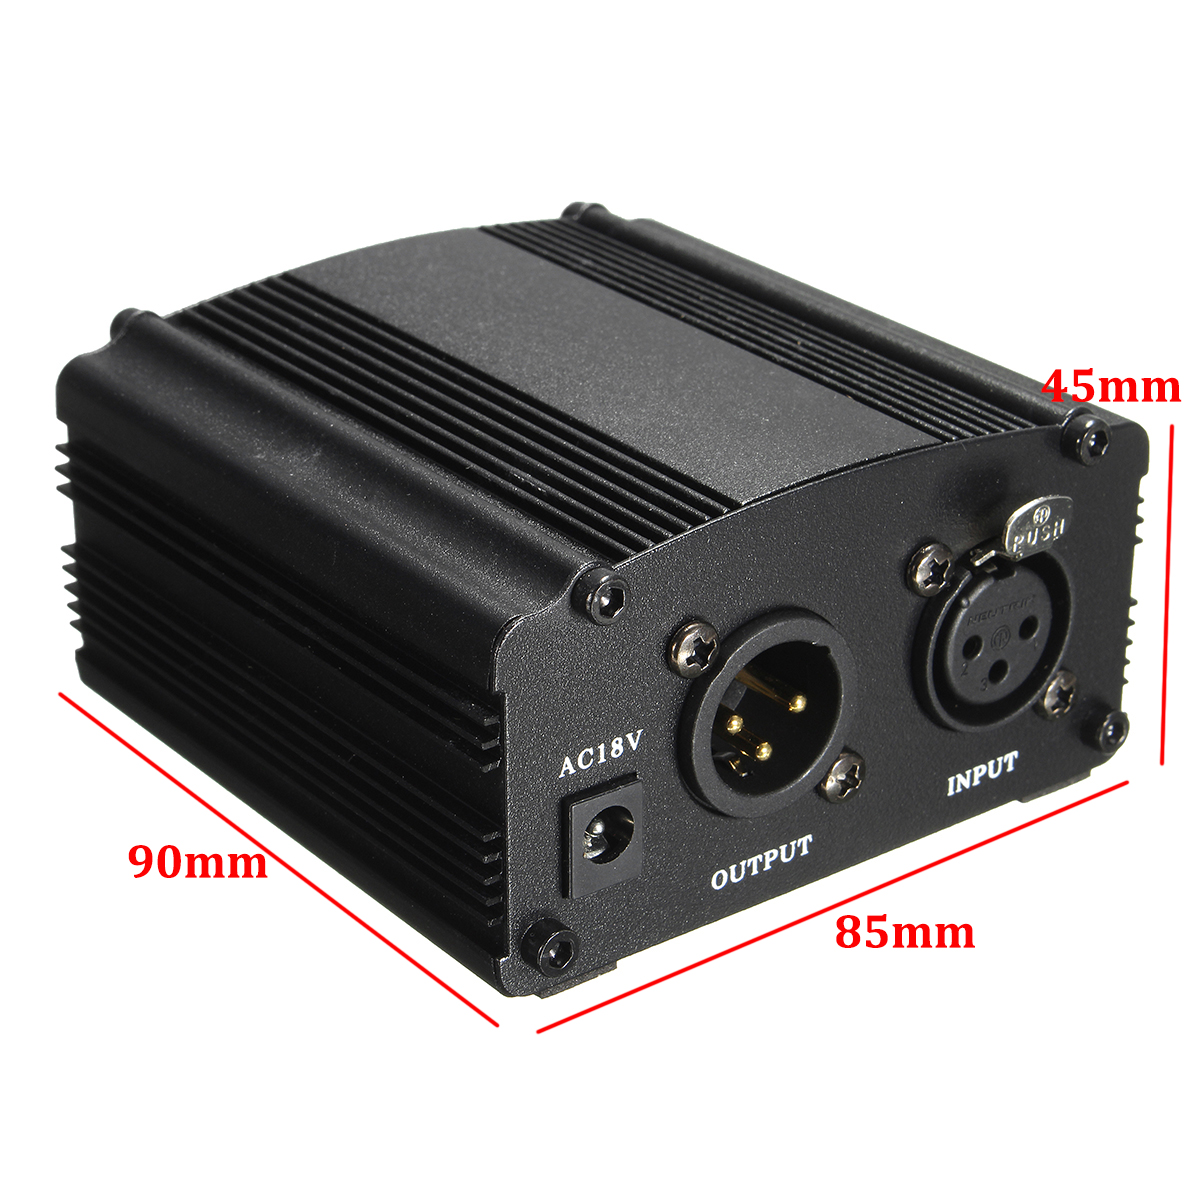 1-CH-DC-48V-Phantom-Power-Supply-with-Adapter-For-Condenser-Microphone-MIC-1148023